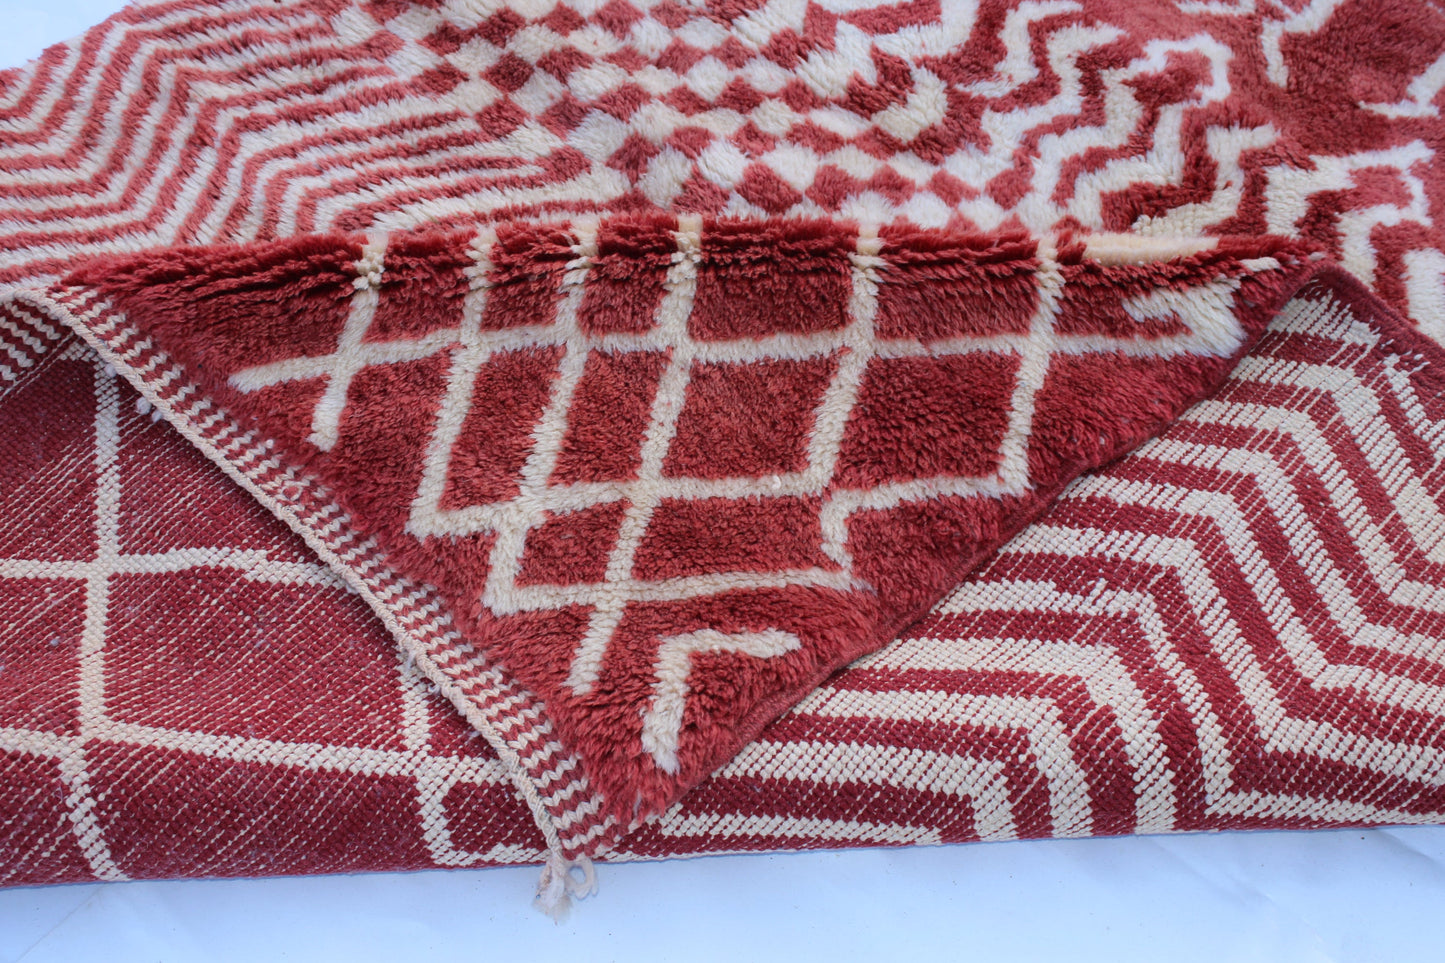 Beni Ourain rugs originate from the Atlas Mountains of Morocco and are characterized by their distinctive, neutral-toned, and geometric designs. These handwoven rugs often feature a plush pile and are made by the Berber tribes,  size is 270x168 cm